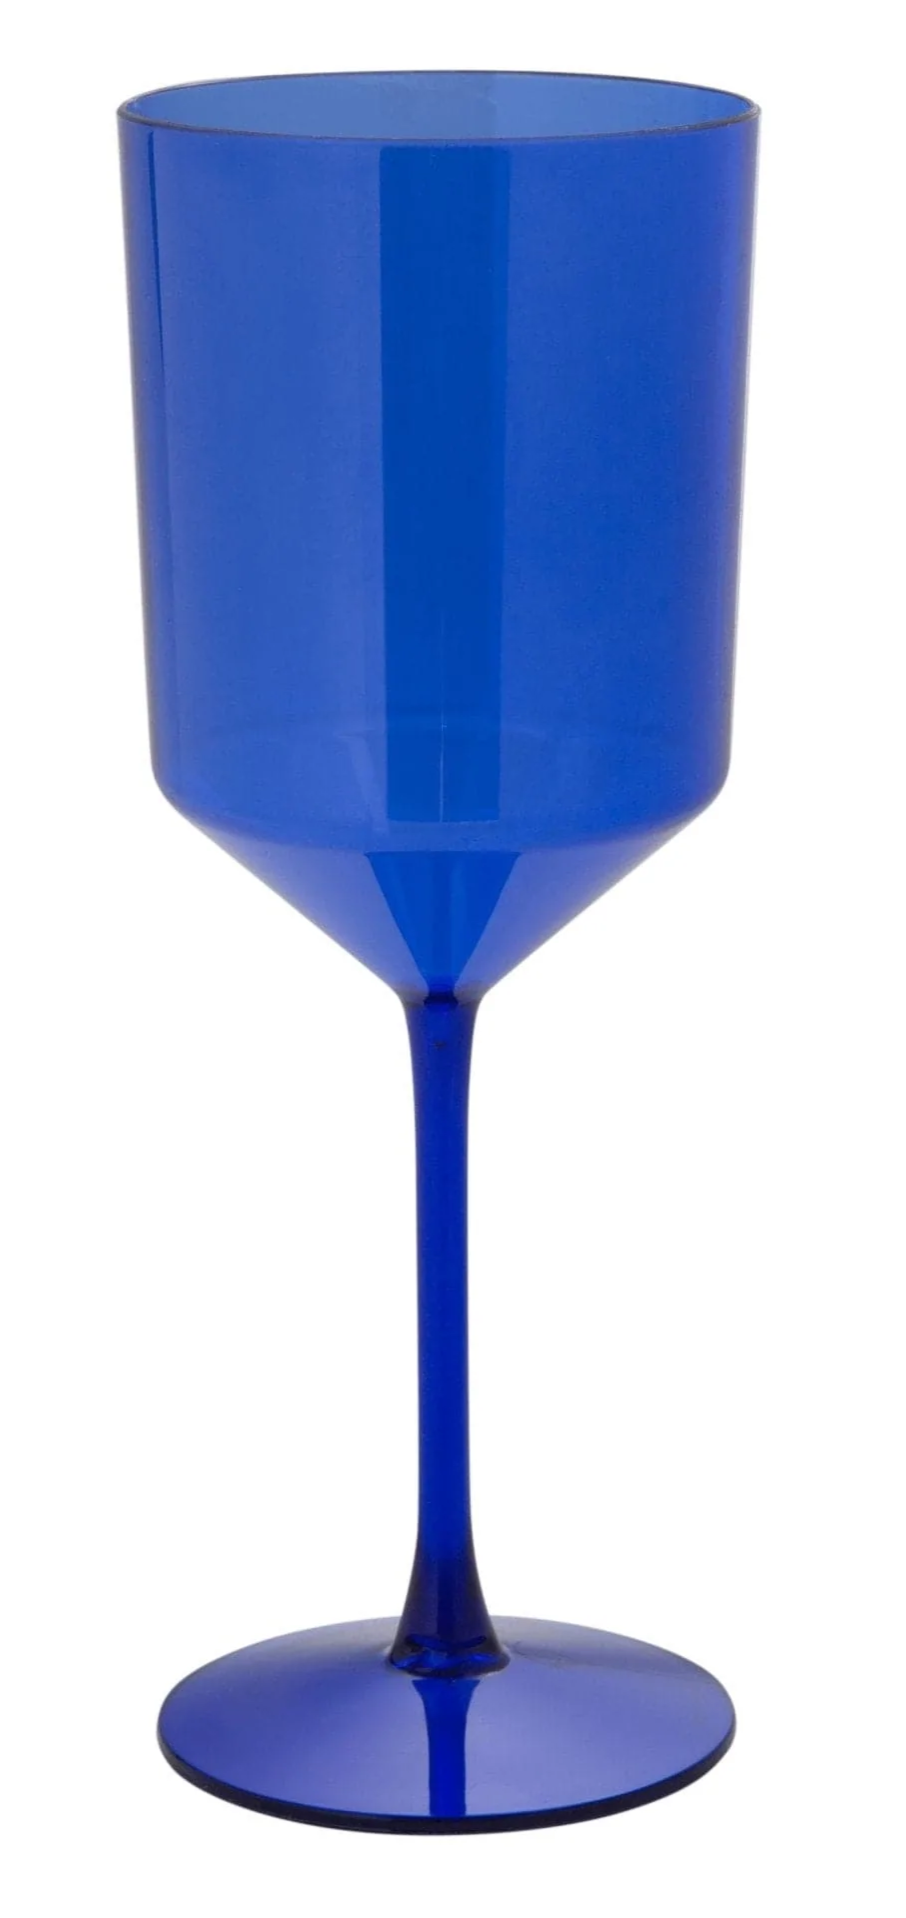 Plastic Blue Wine Cup with Stem (4ct) - Set With Style